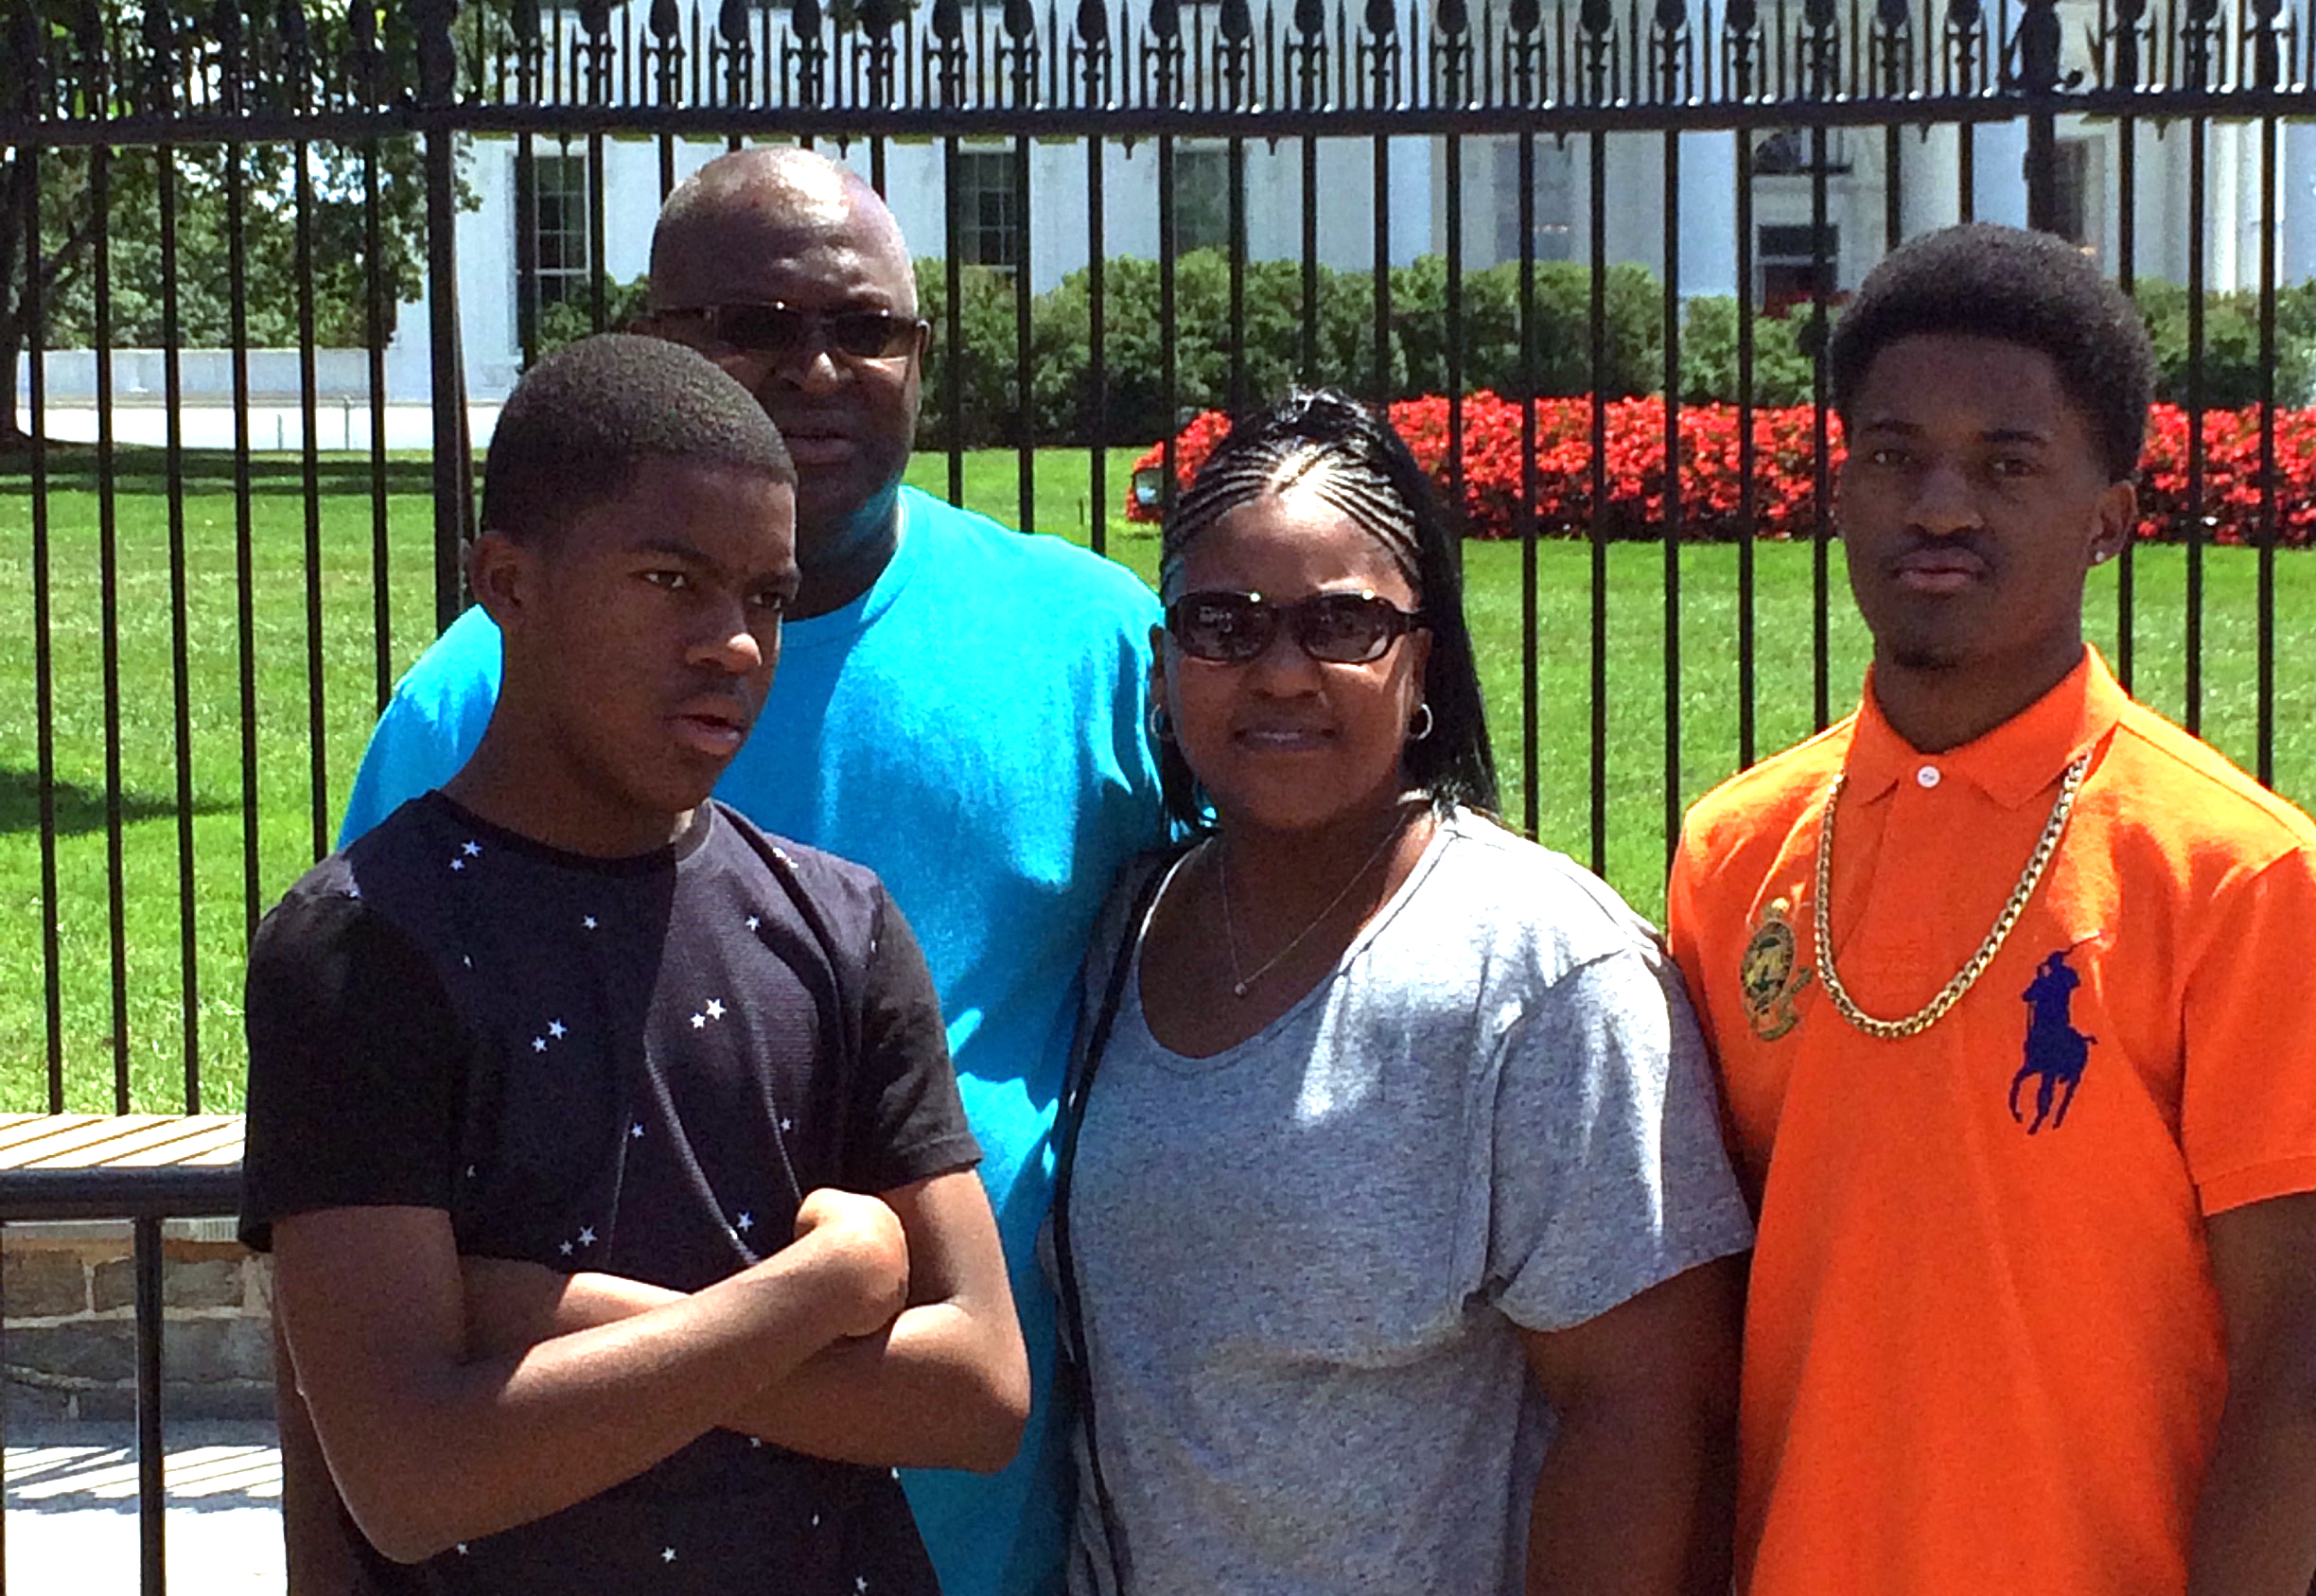 A Black family poses outside the White House gates, smiling for the camera